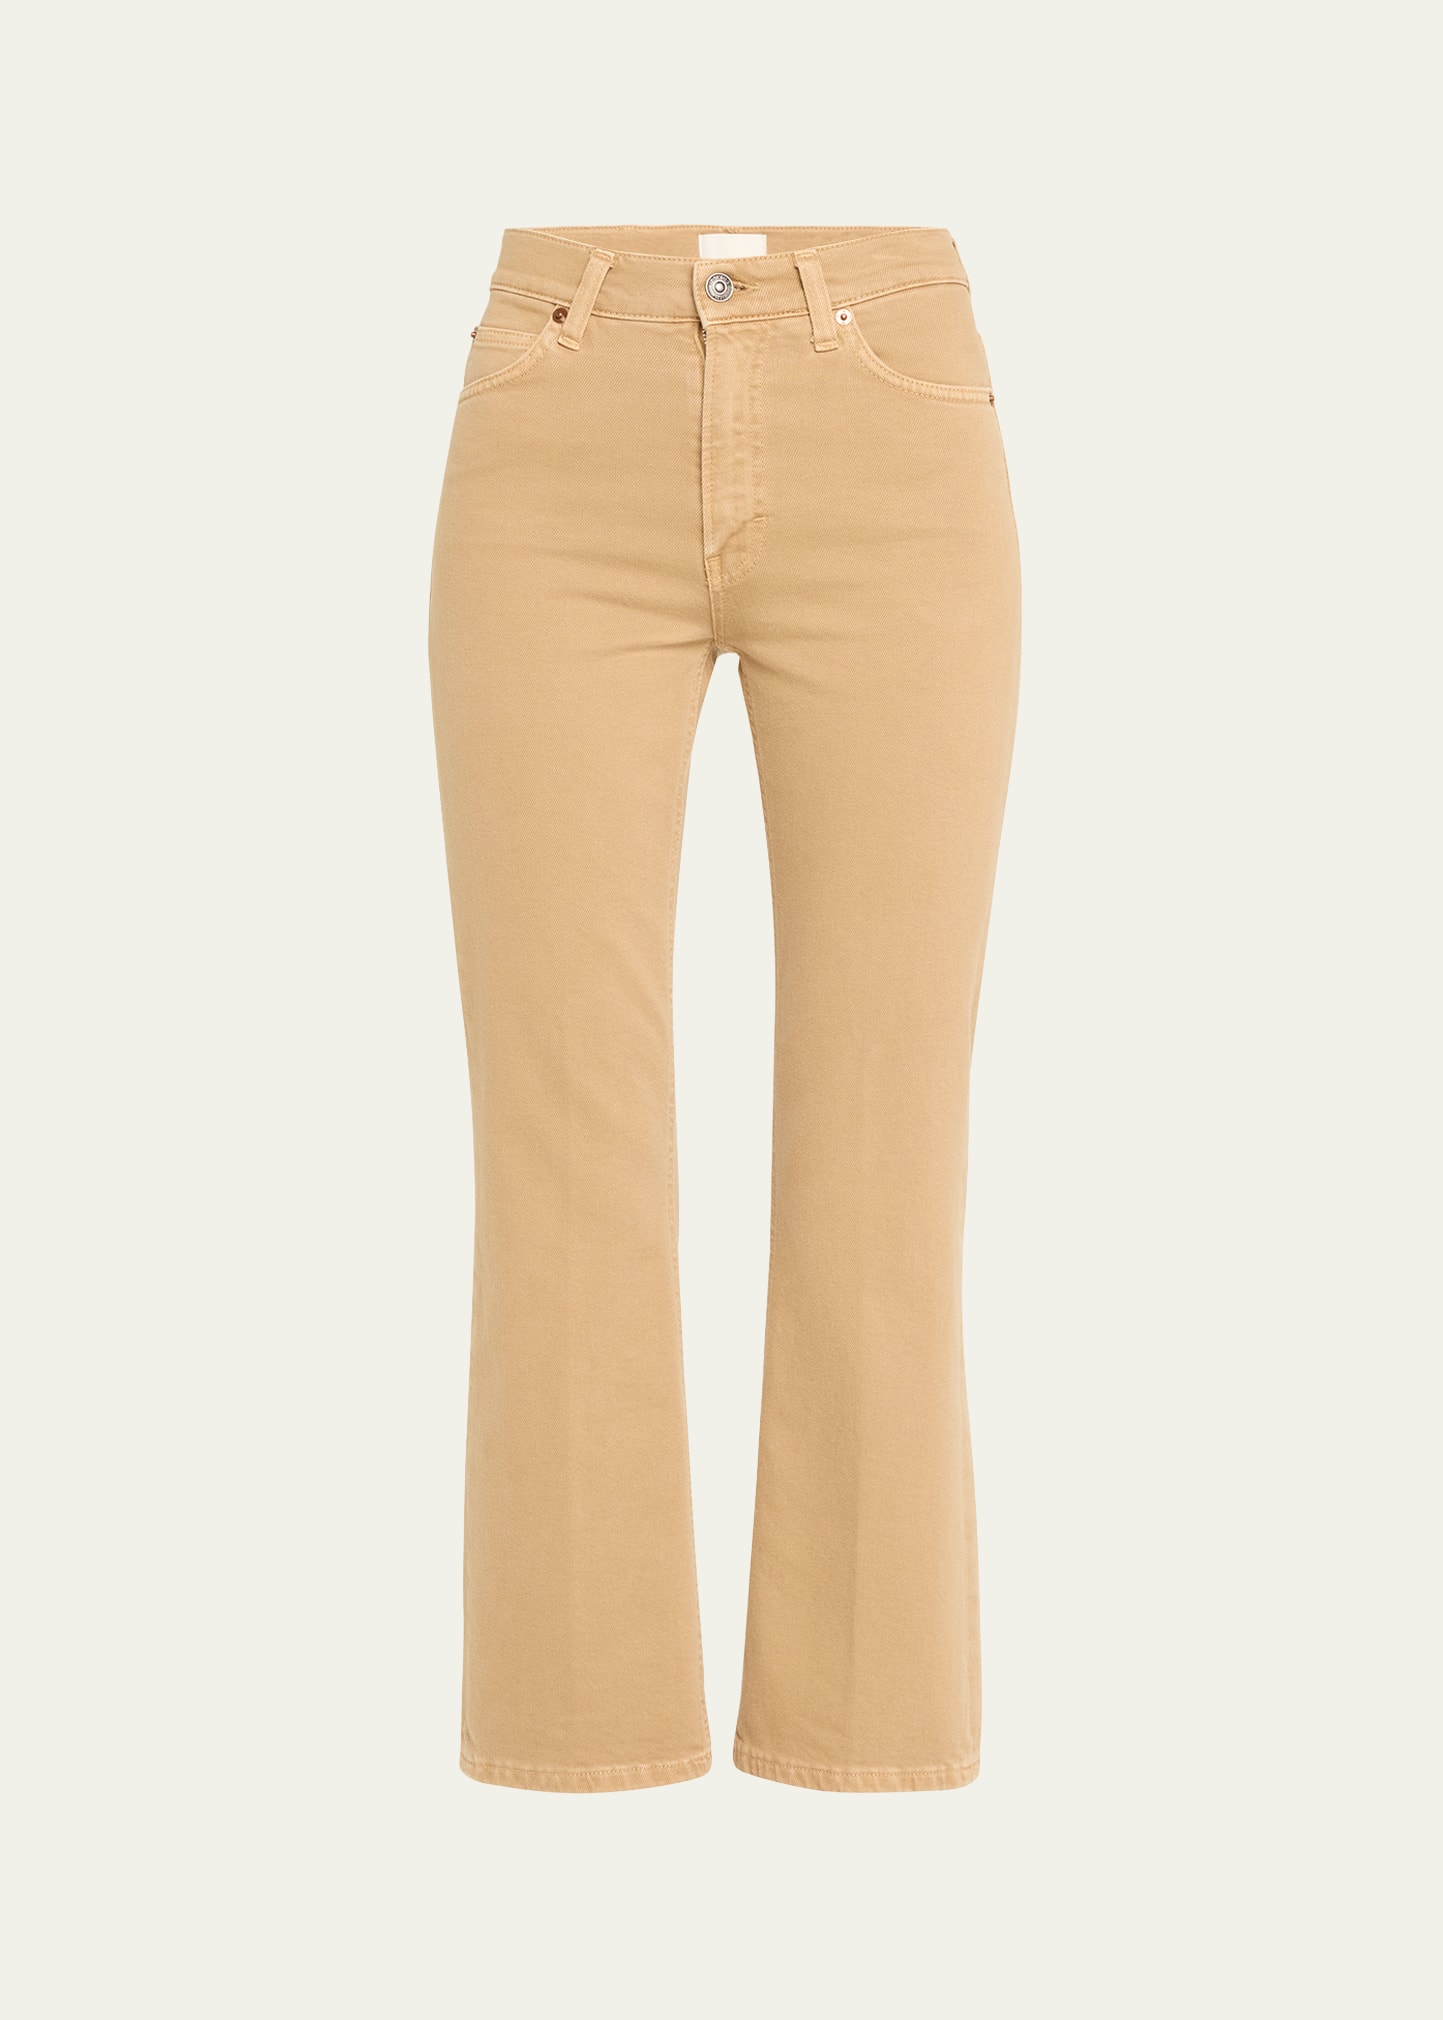 Haikure Formentera Straight Crop Jeans In Camel